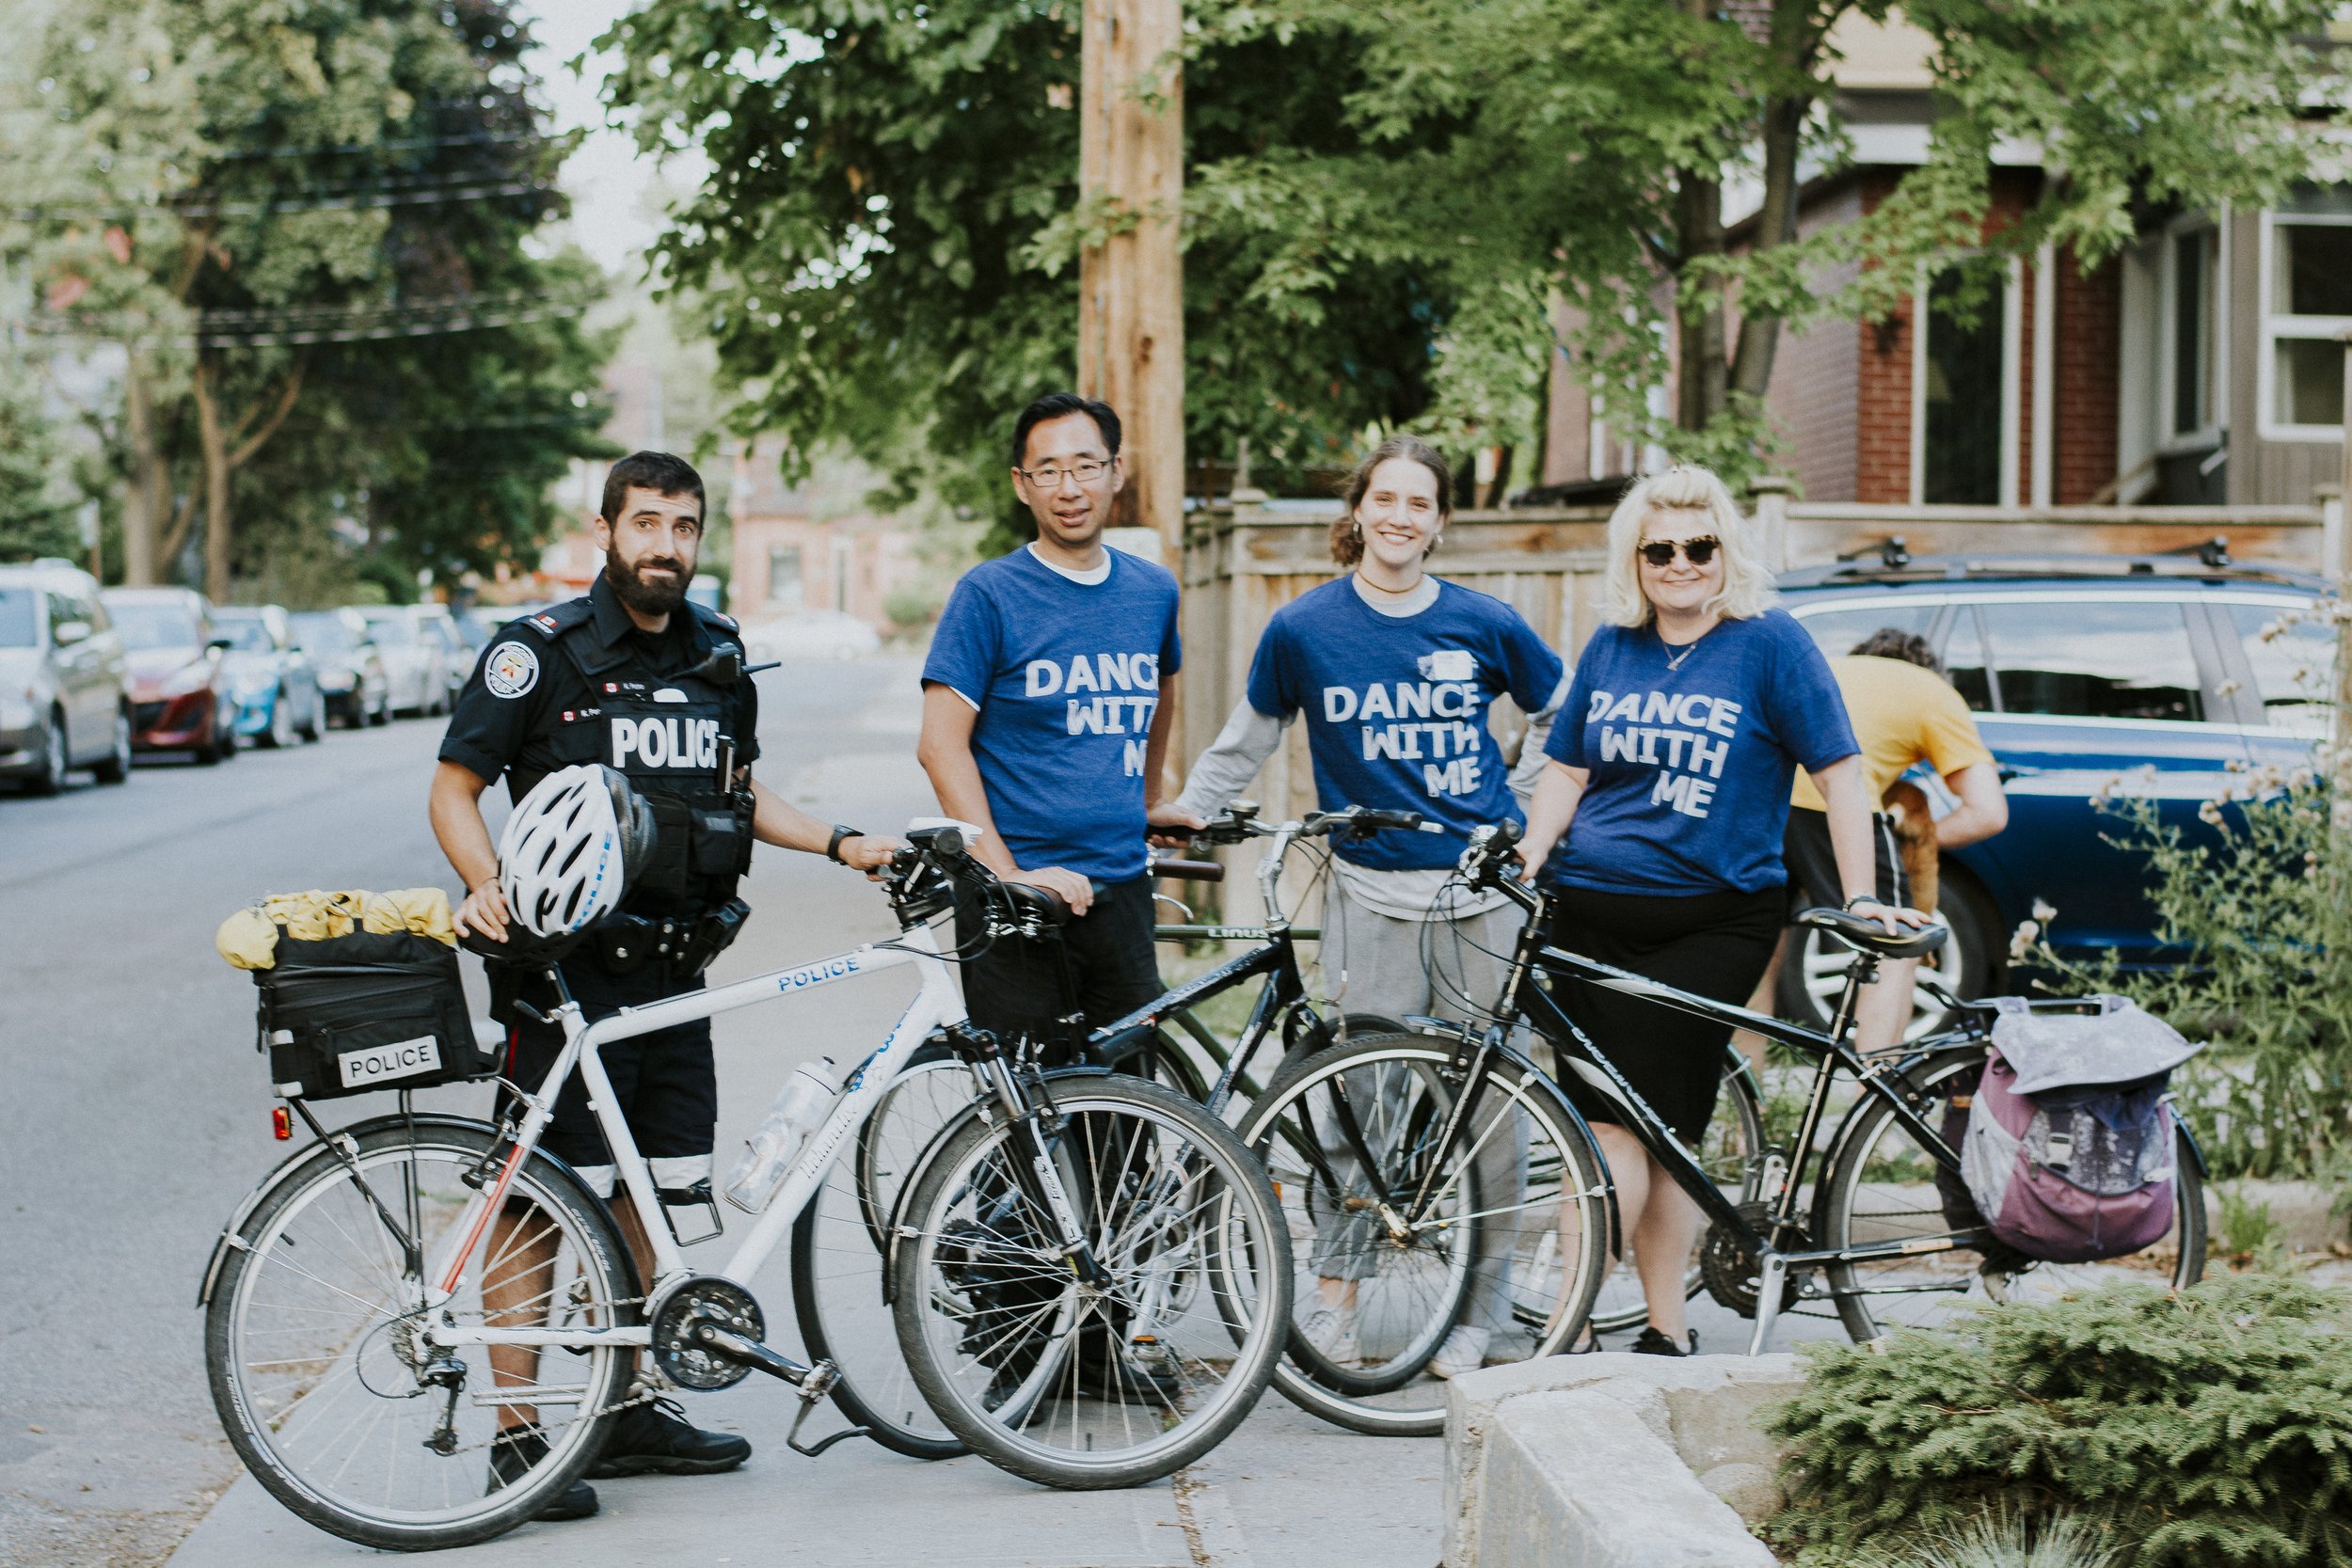 Toronto Police officer, and three participants posing happily with bikes